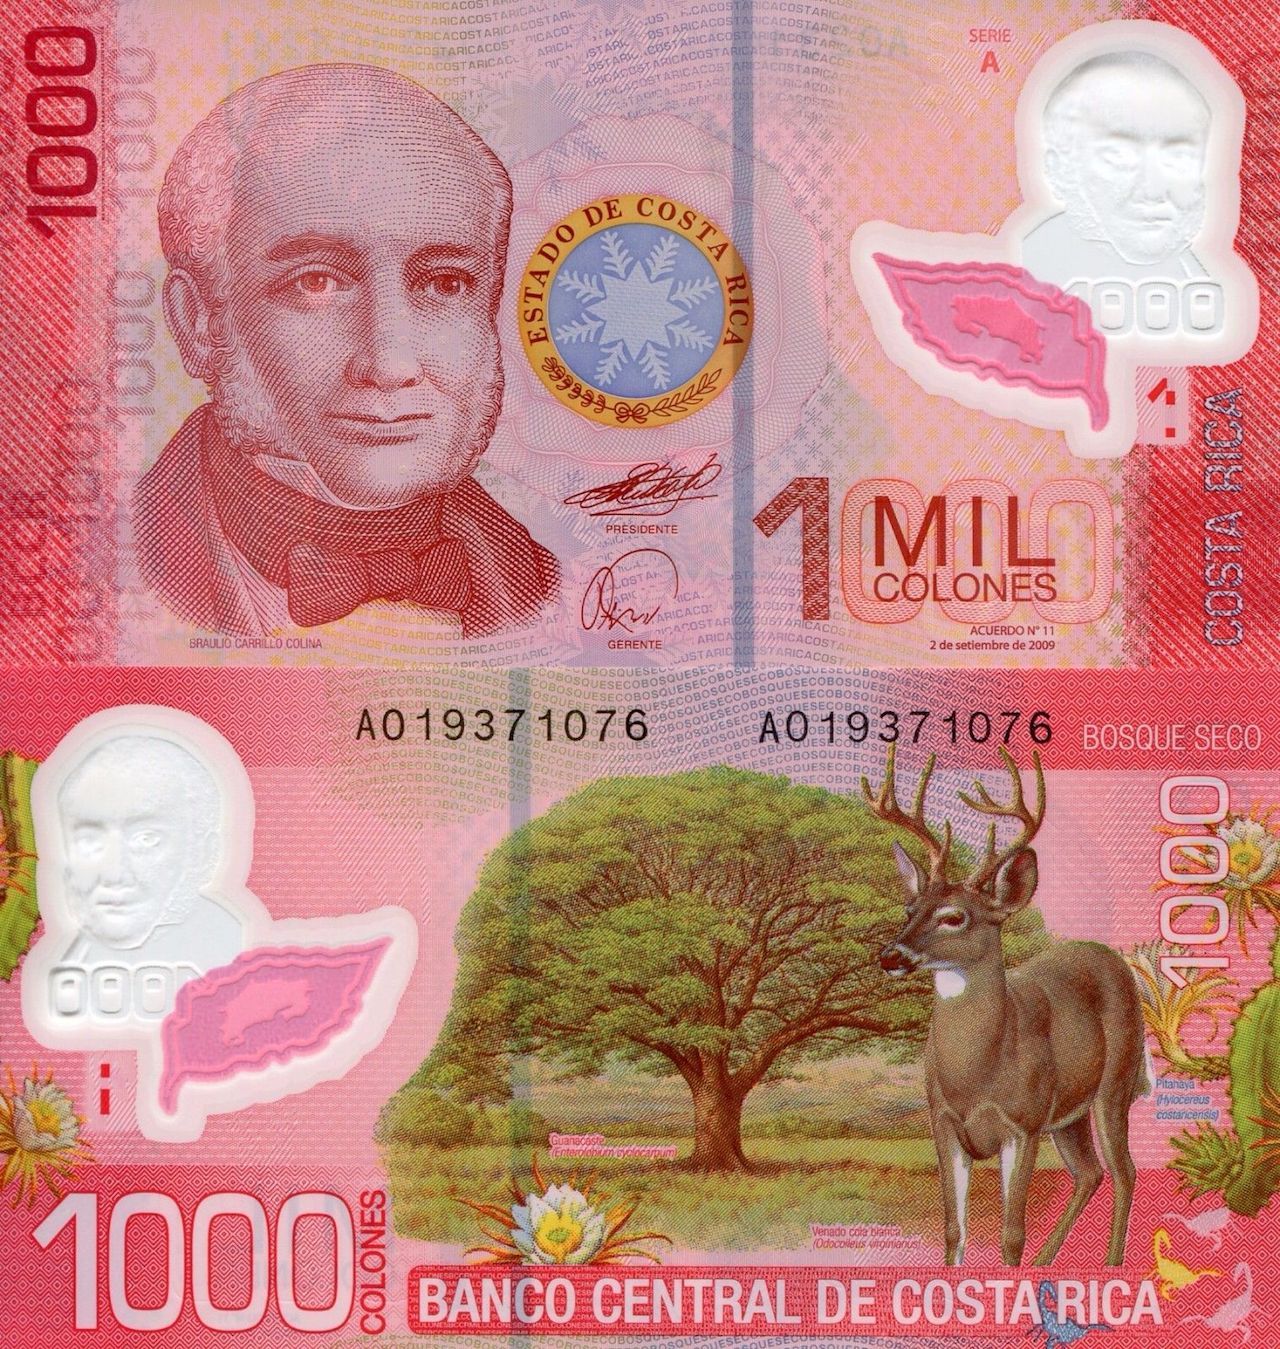 Costa Rica currency